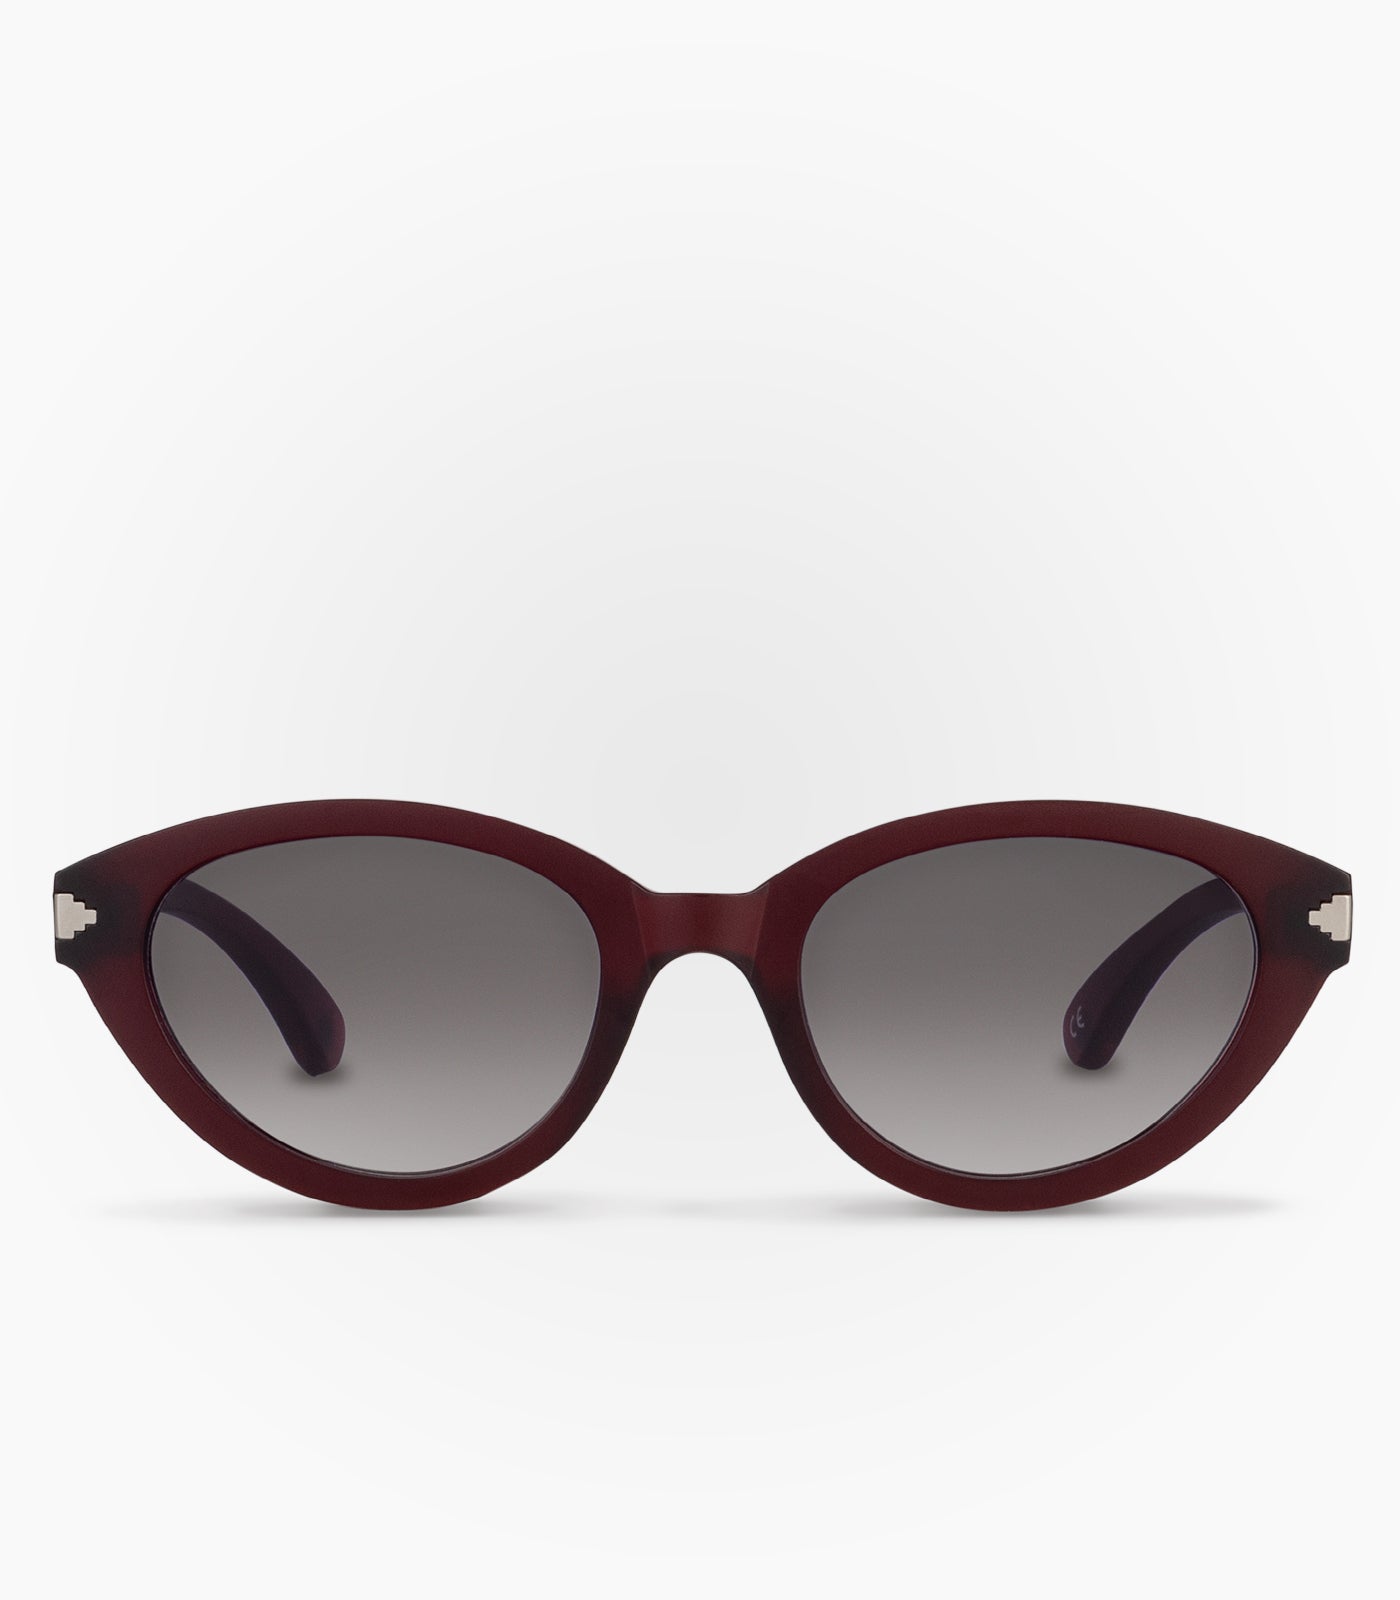 Sunglasses Mockup - Front View - Free Download Images High Quality PNG, JPG  - 17727